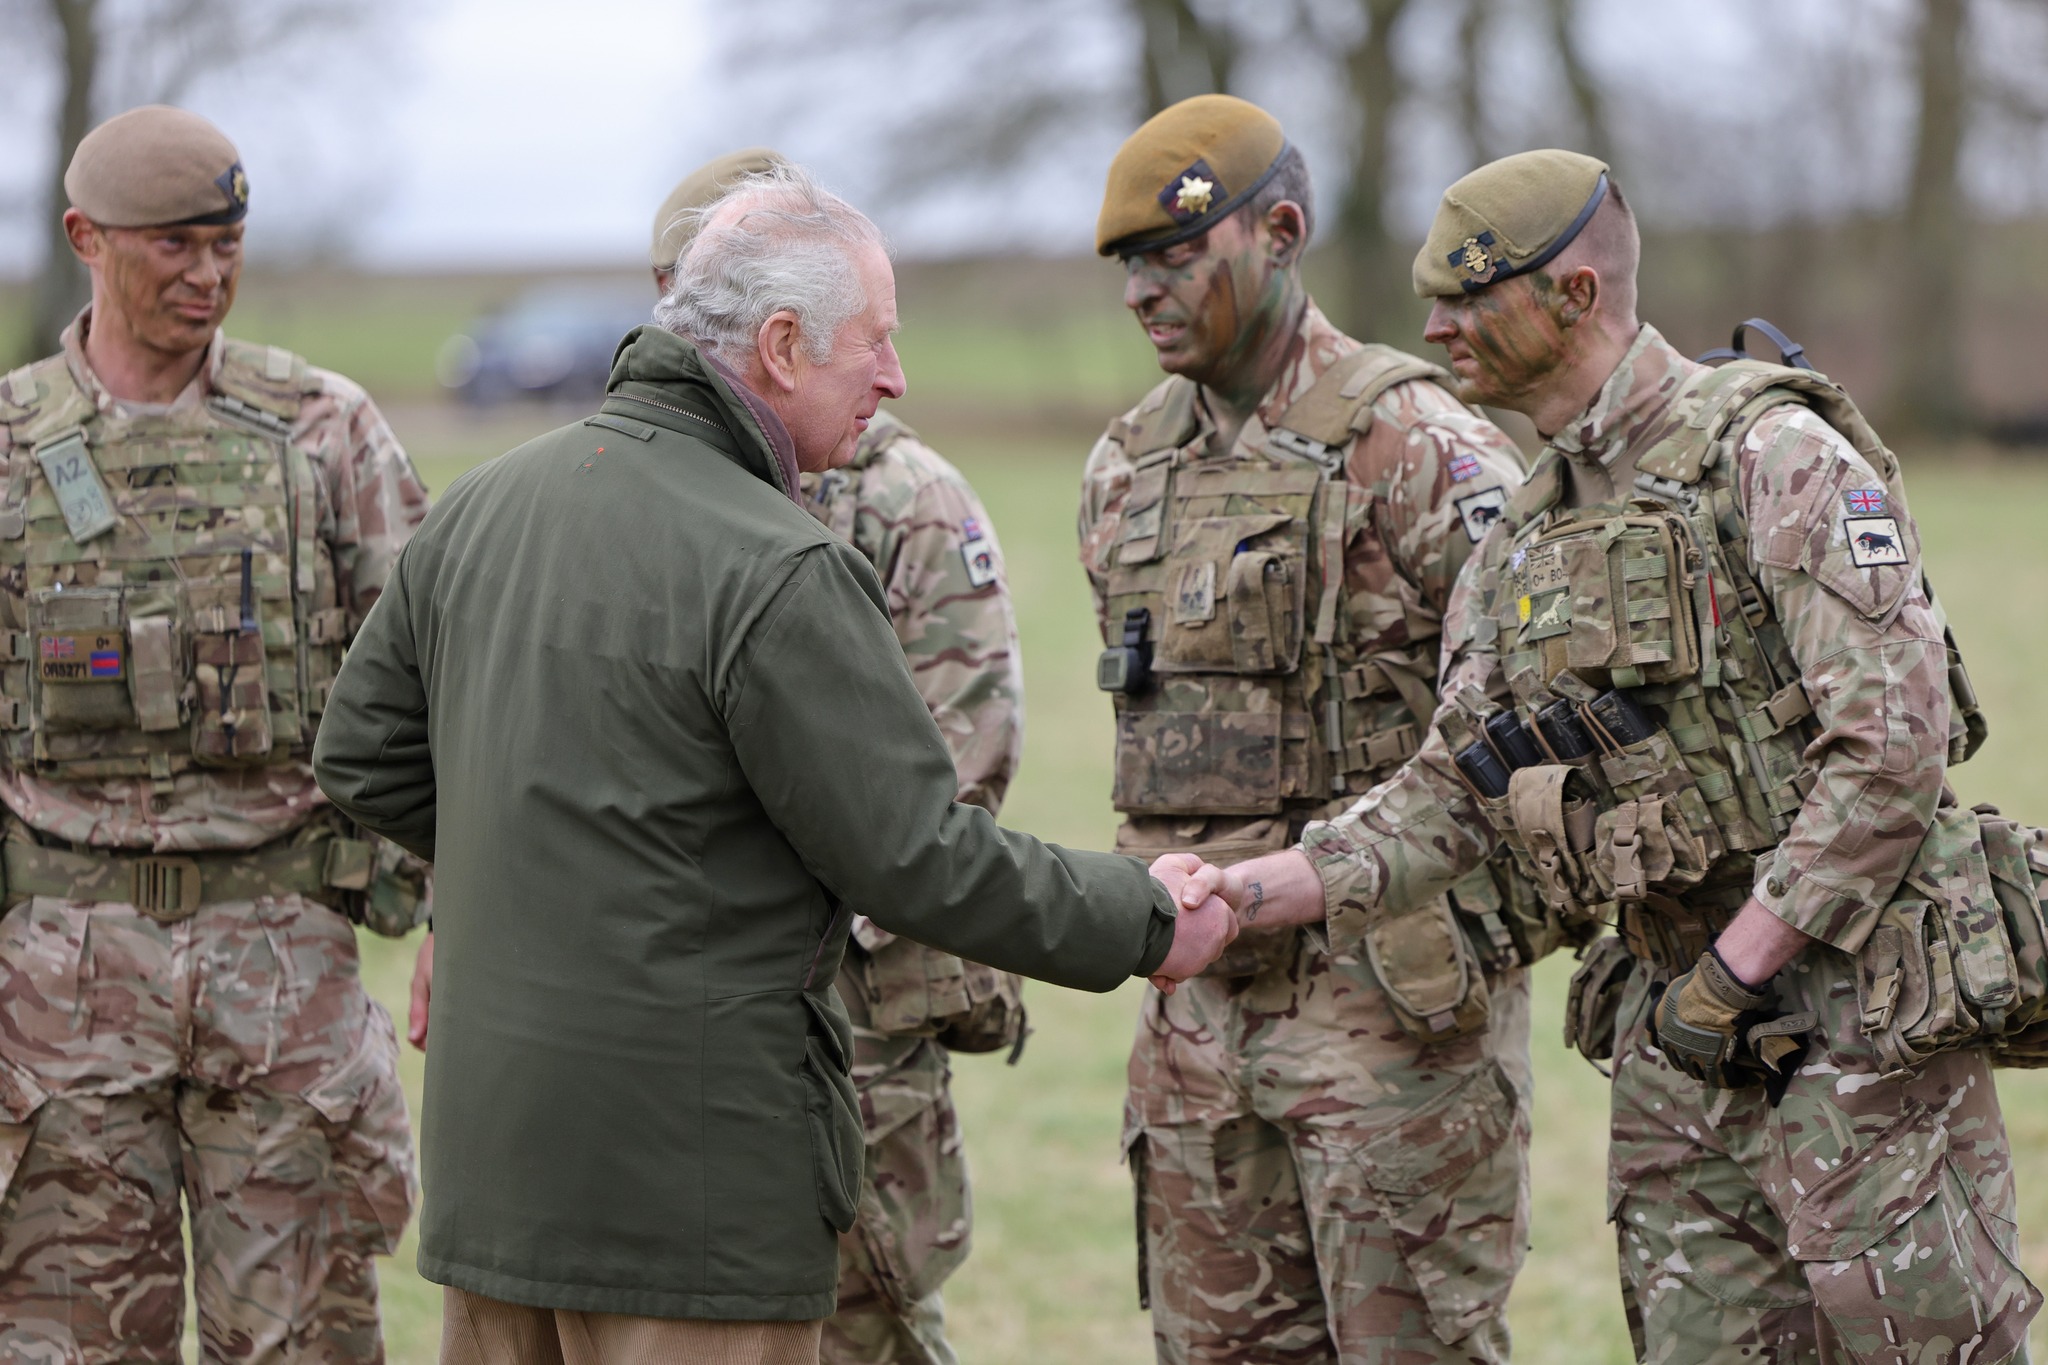 King Charles III meets Ukrainian recruits during a visit to a training site for Ukrainian military, in Wiltshire, where recruits are completing five weeks of basic combat training by British and international partner forces, before returning to fight in Ukraine. Picture date: Monday February 20, 2023.